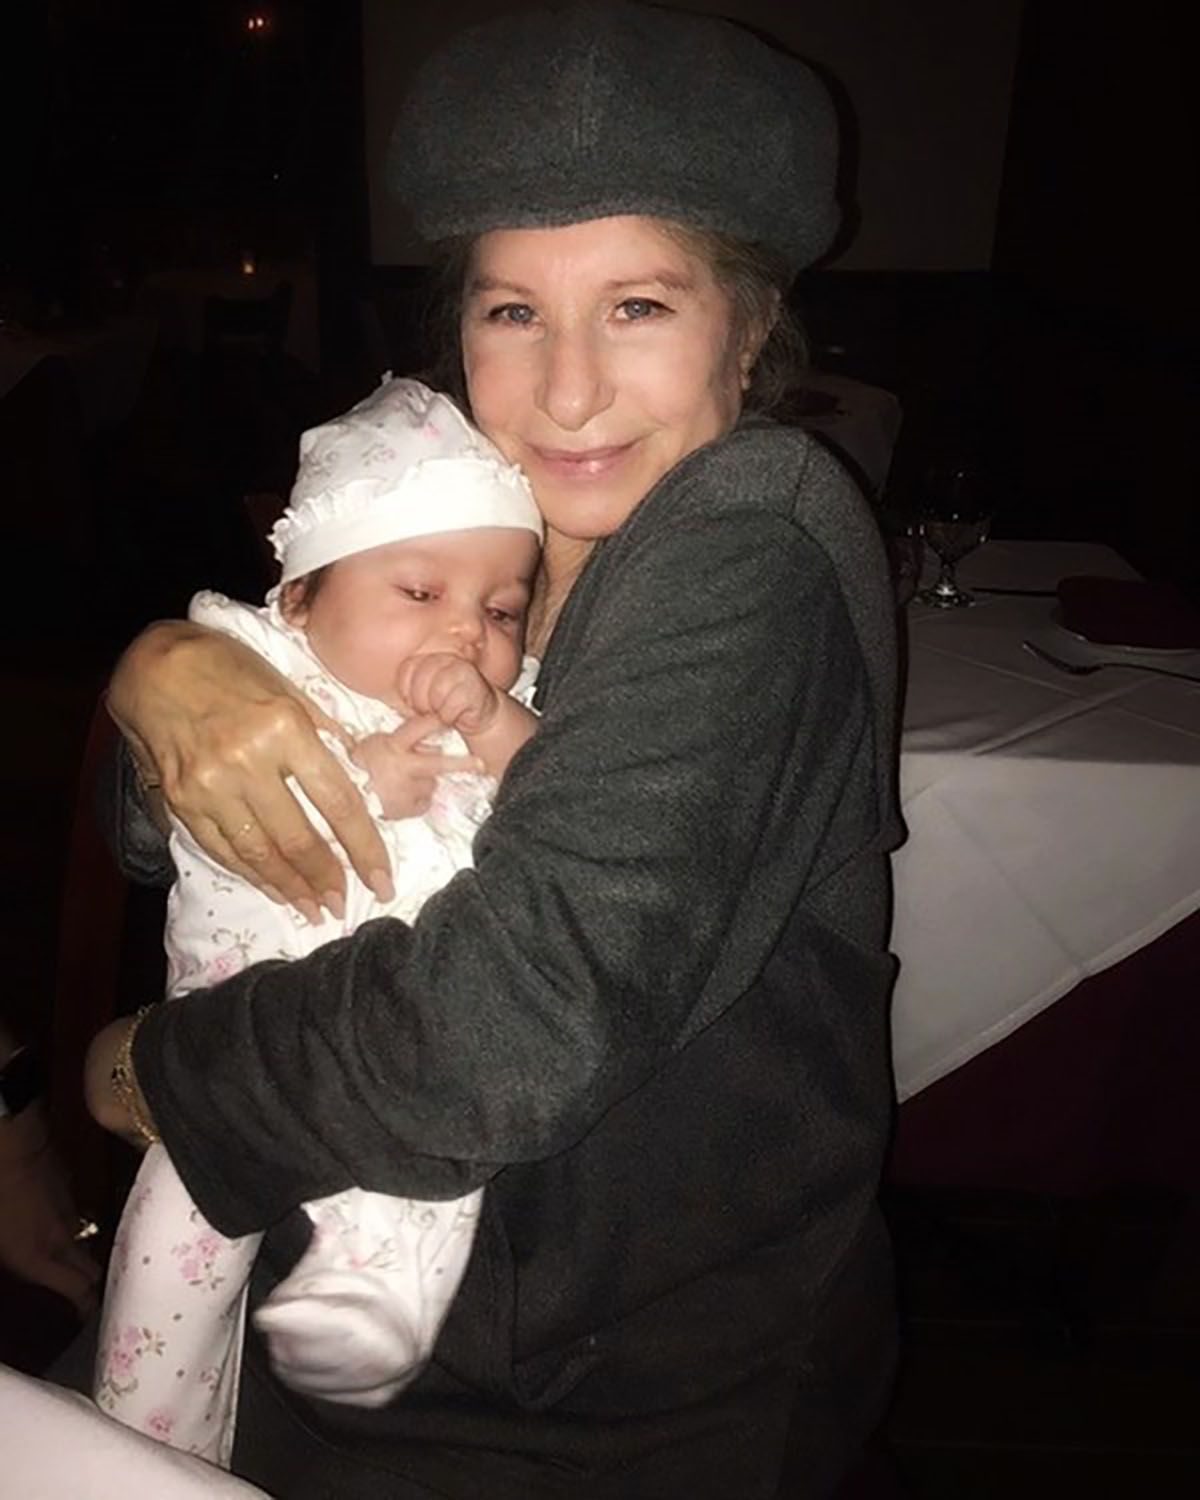 https://www.instagram.com/p/BtMThpiHtfU/ barbrastreisand Verified We were at a restaurant but the most delicious thing was my granddaughter Westlyn! 168w